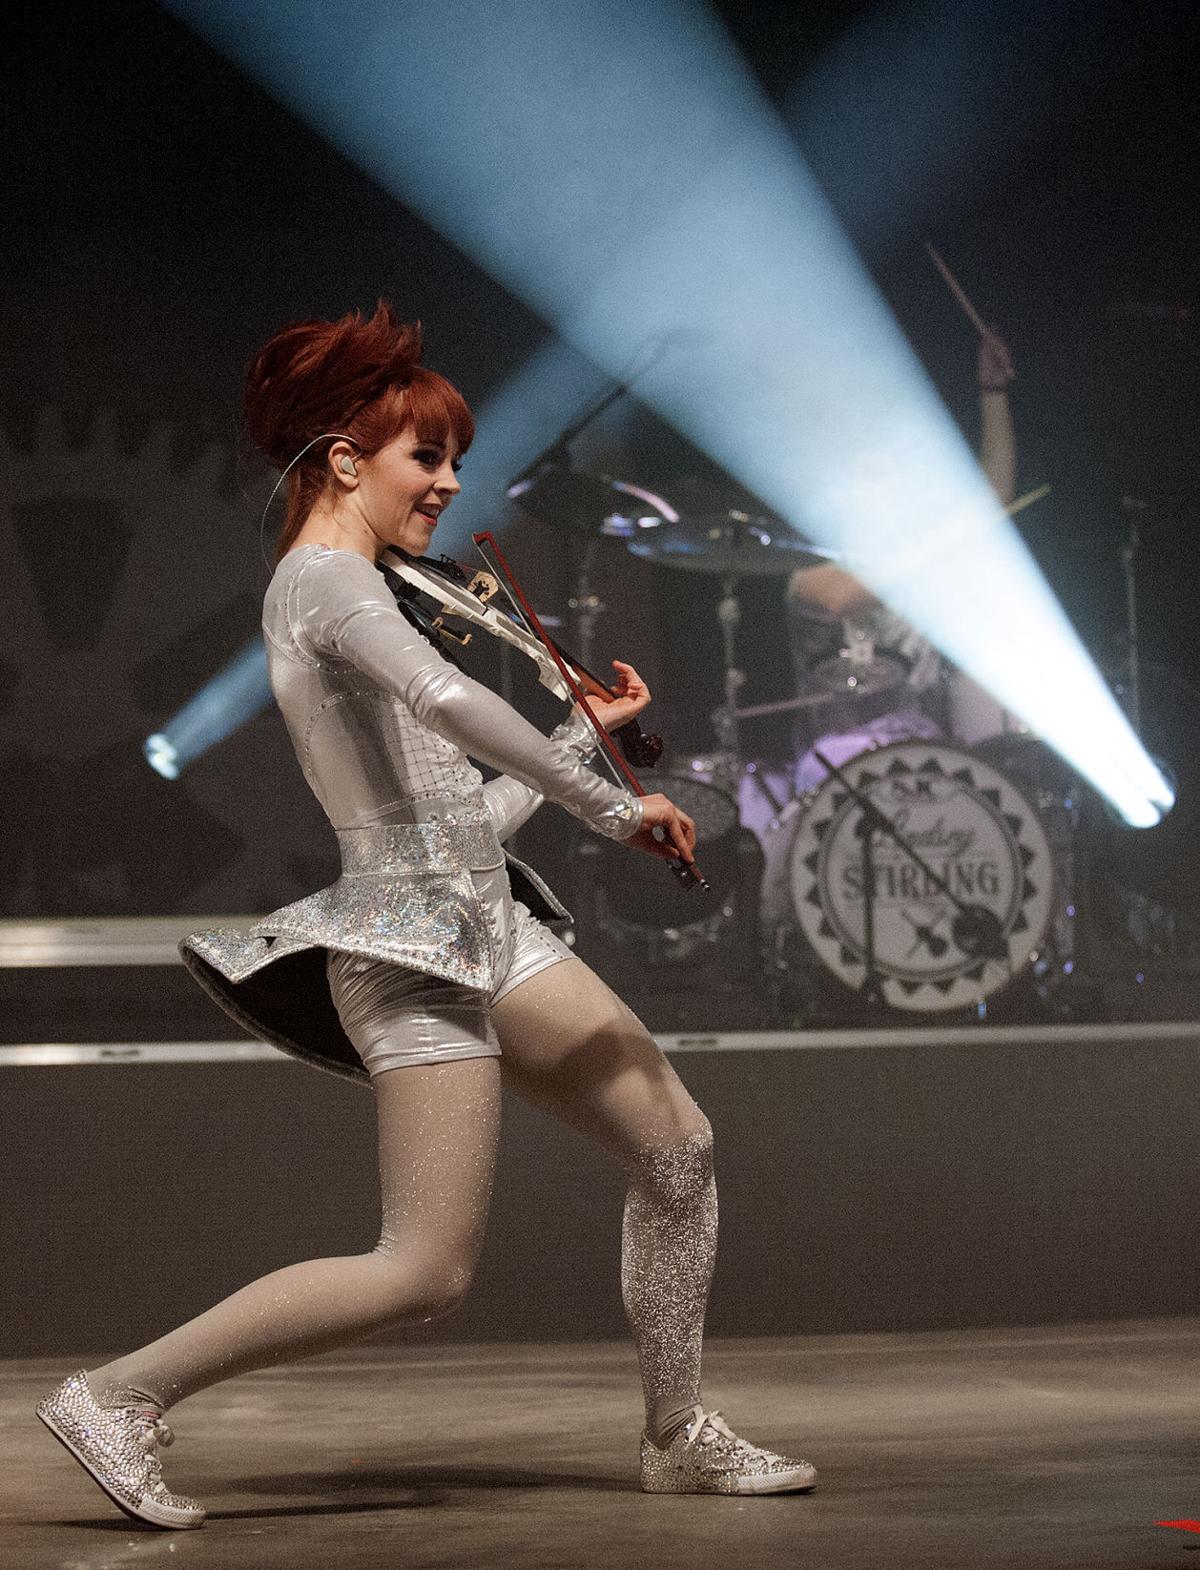 Lindsey Stirling captivates with violin and dancing at Pinewood Bowl